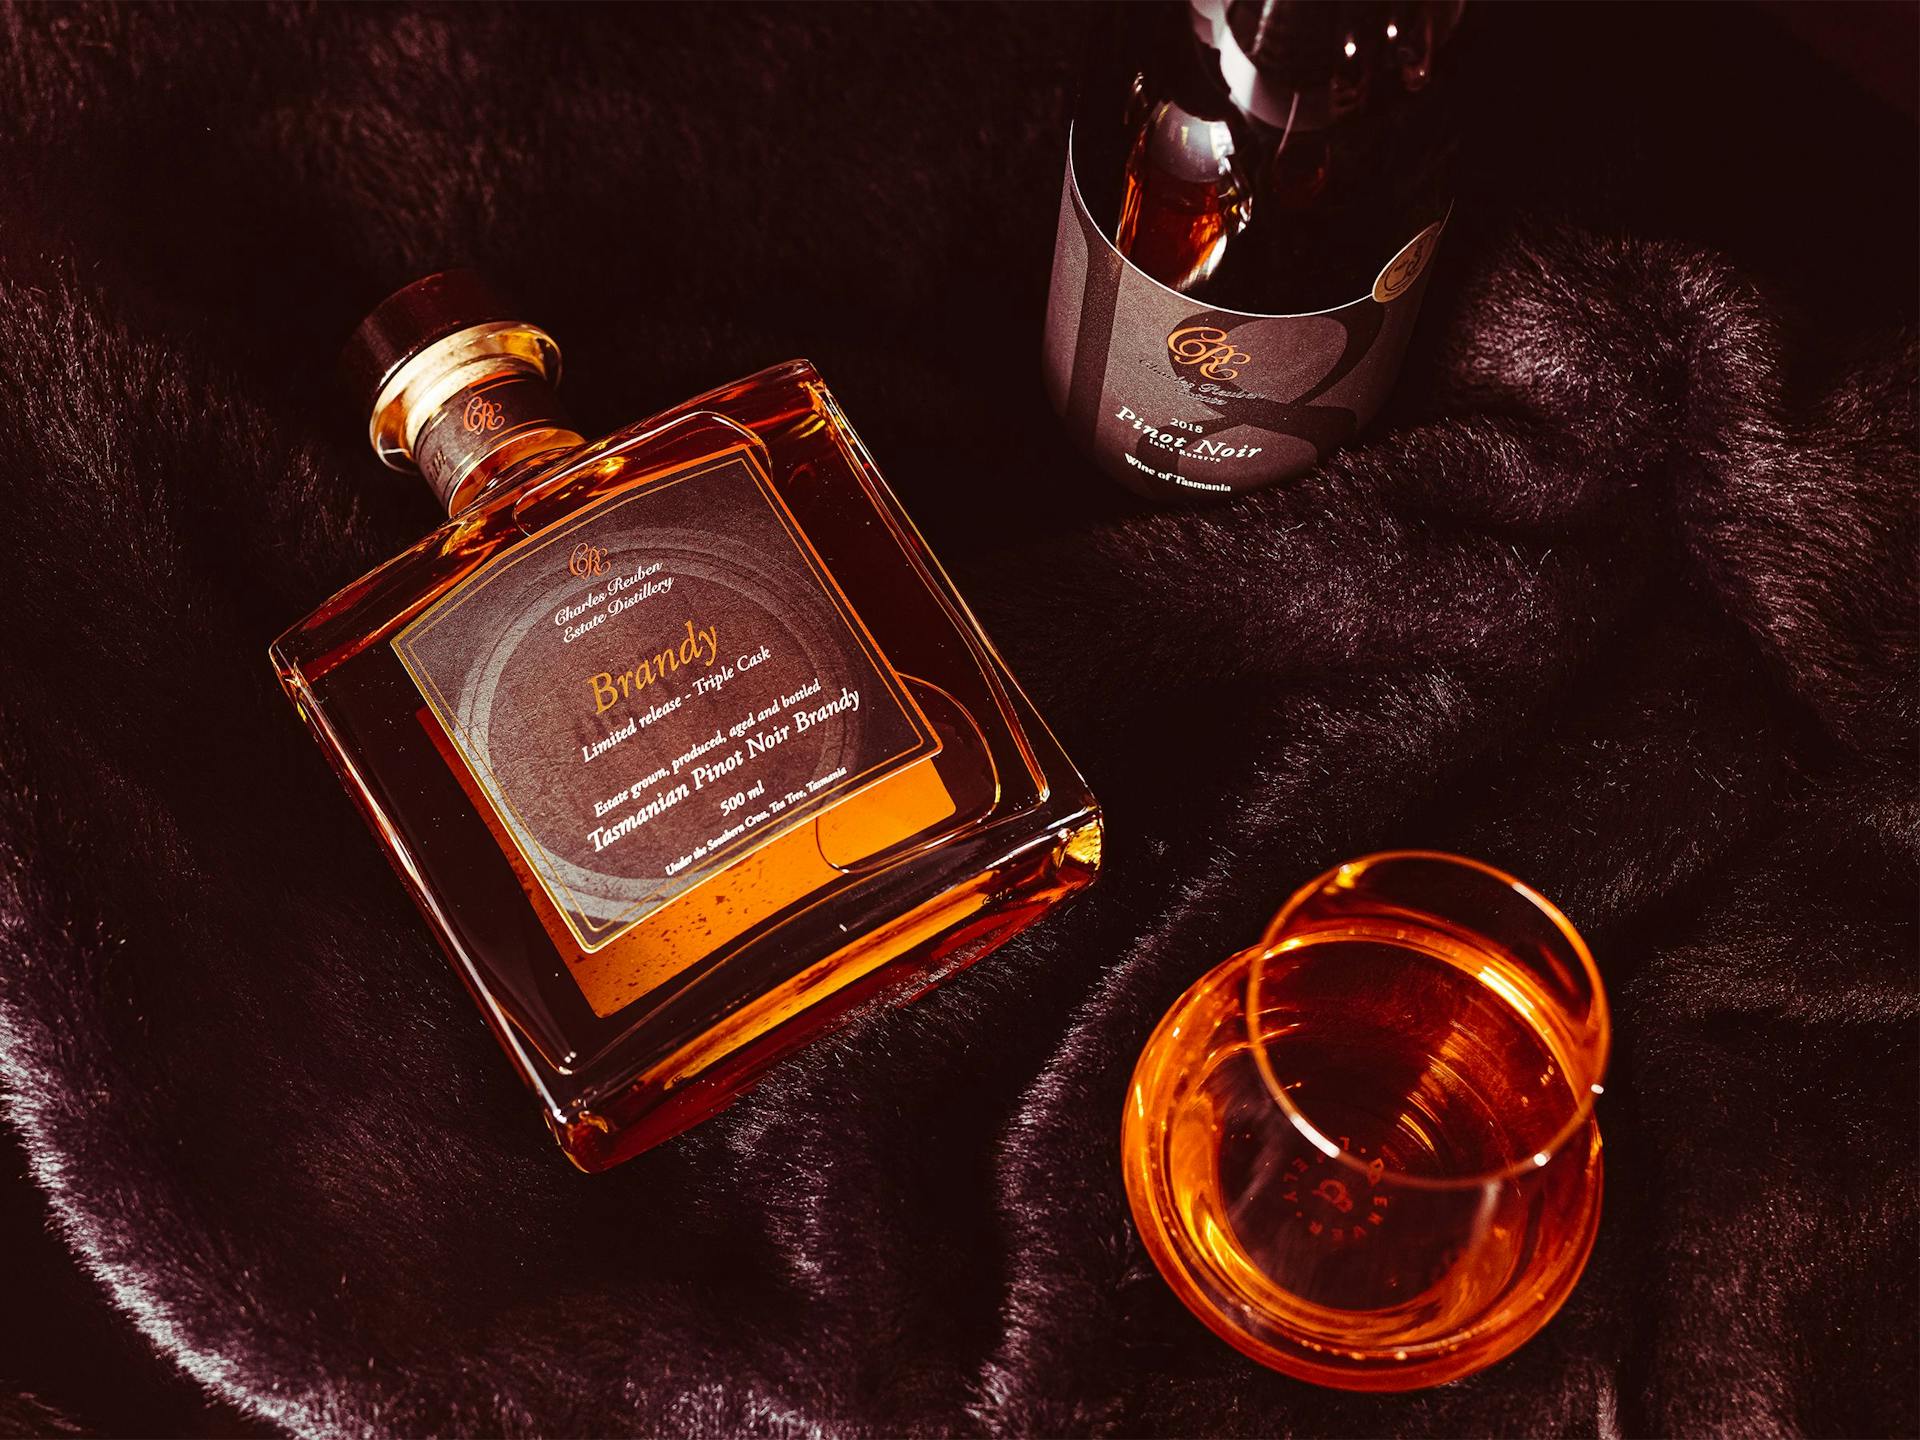 A bottle of brandy and pinot noir sit on black faux fur